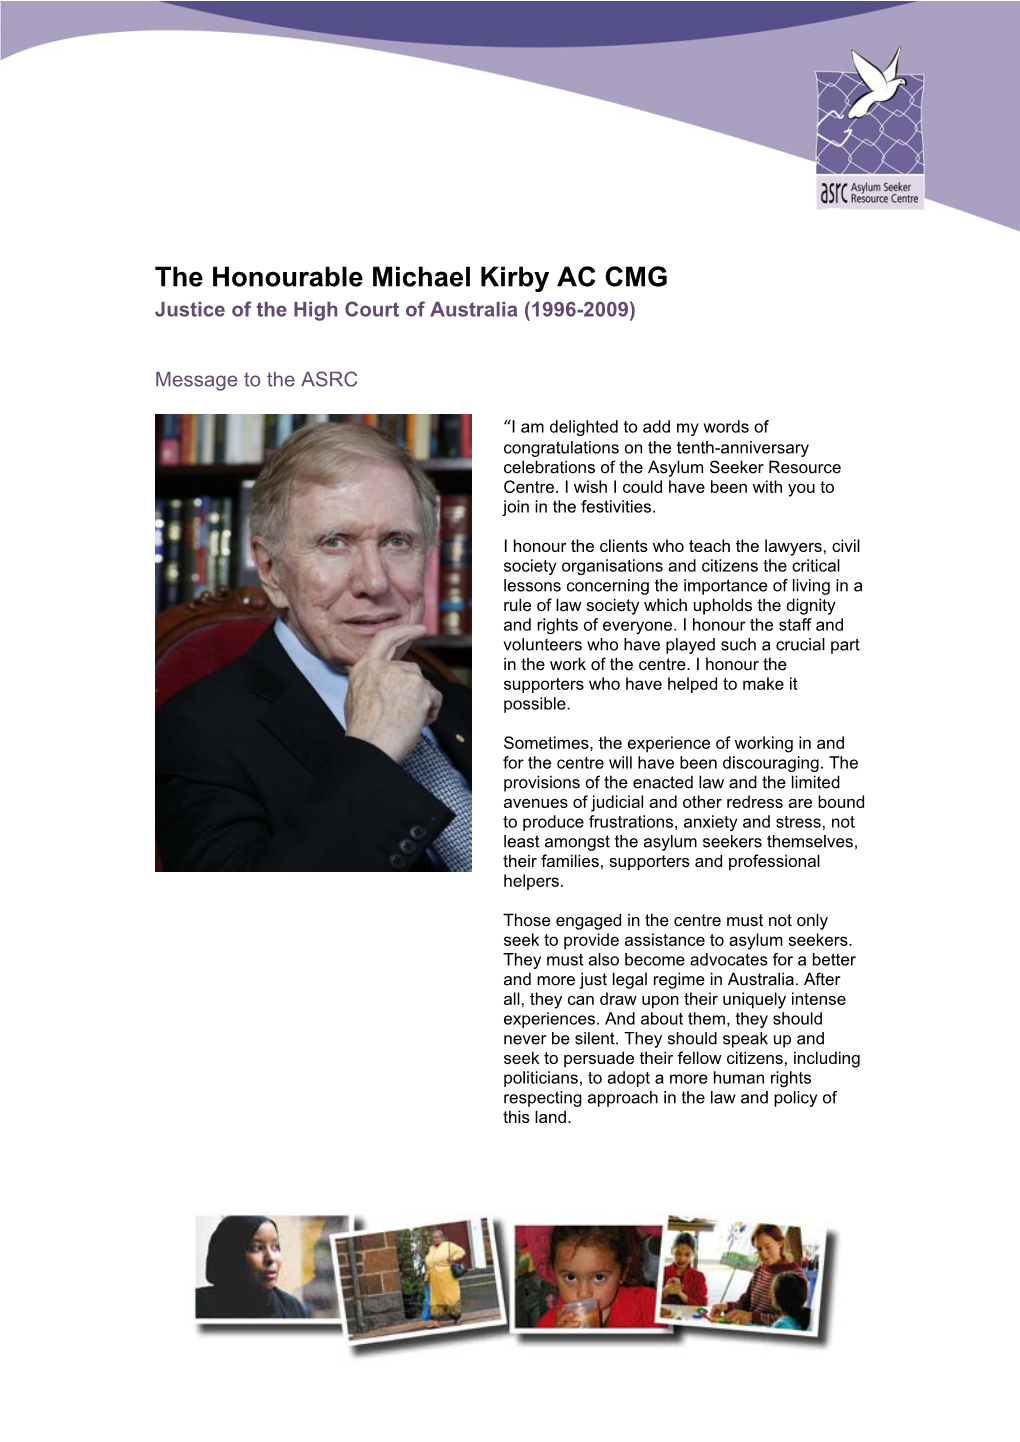 The Honourable Michael Kirby AC CMG Justice of the High Court of Australia (1996-2009)